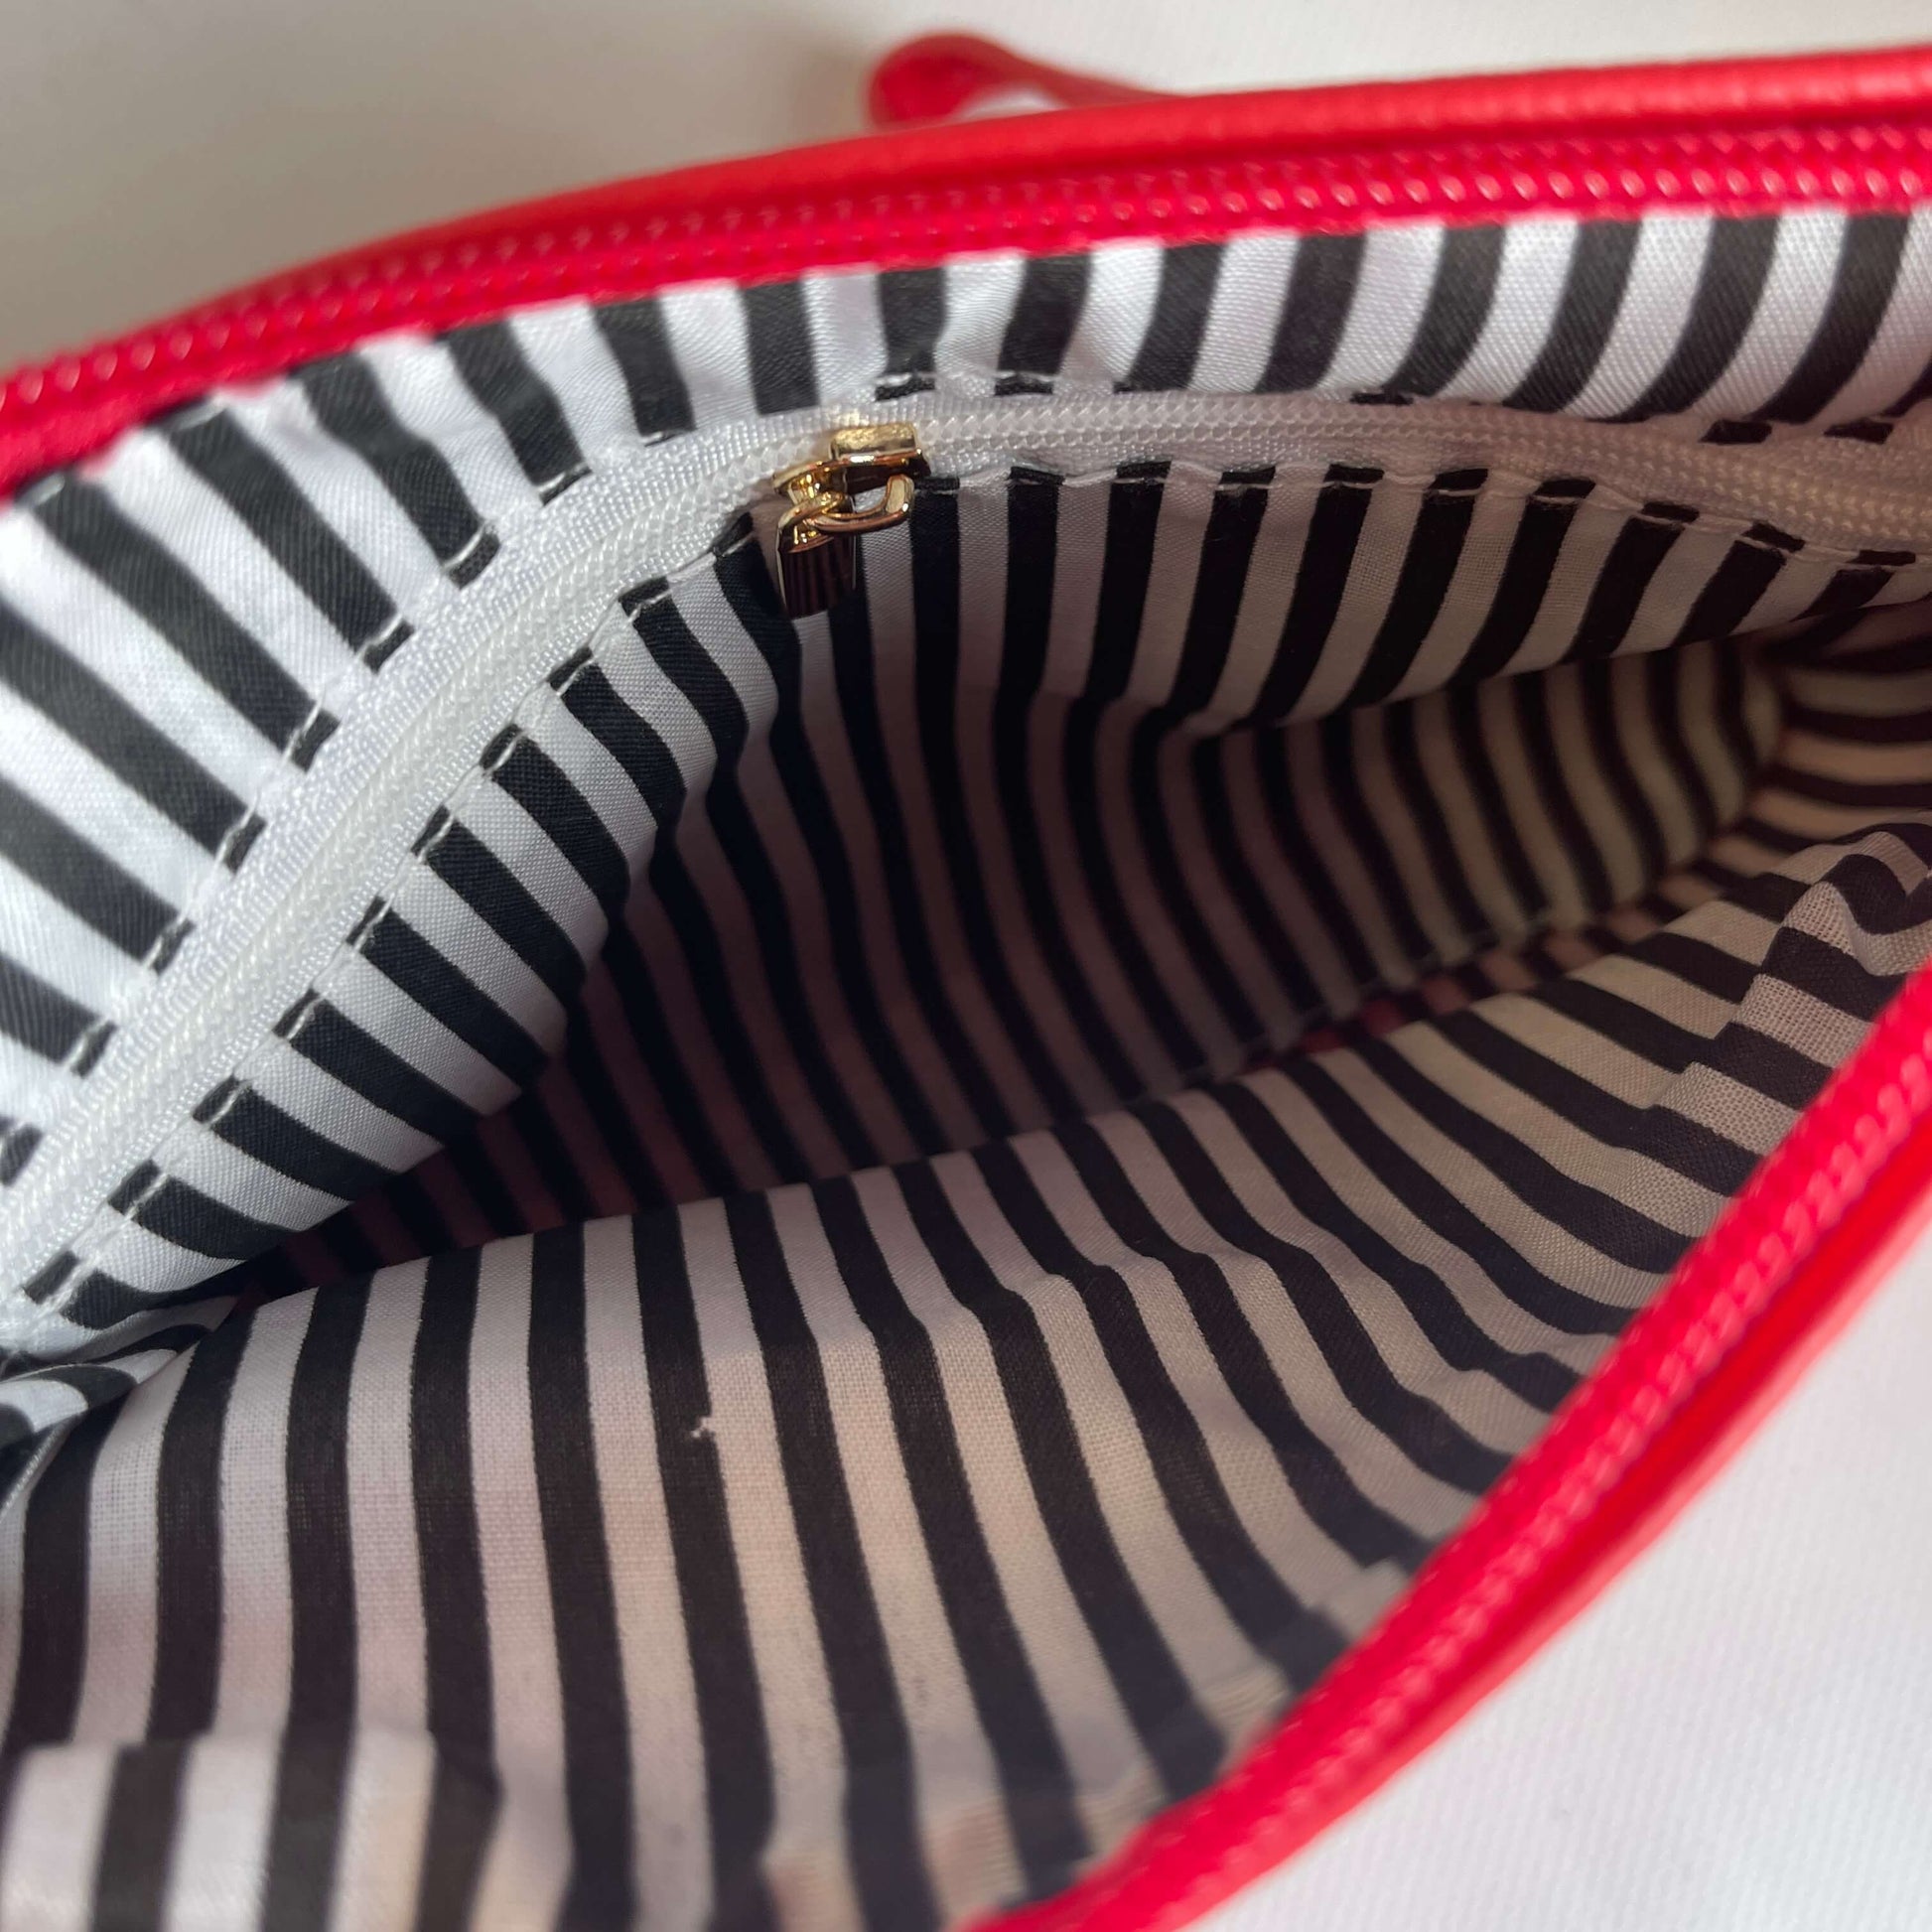 Inside lining of a red clutch bag.